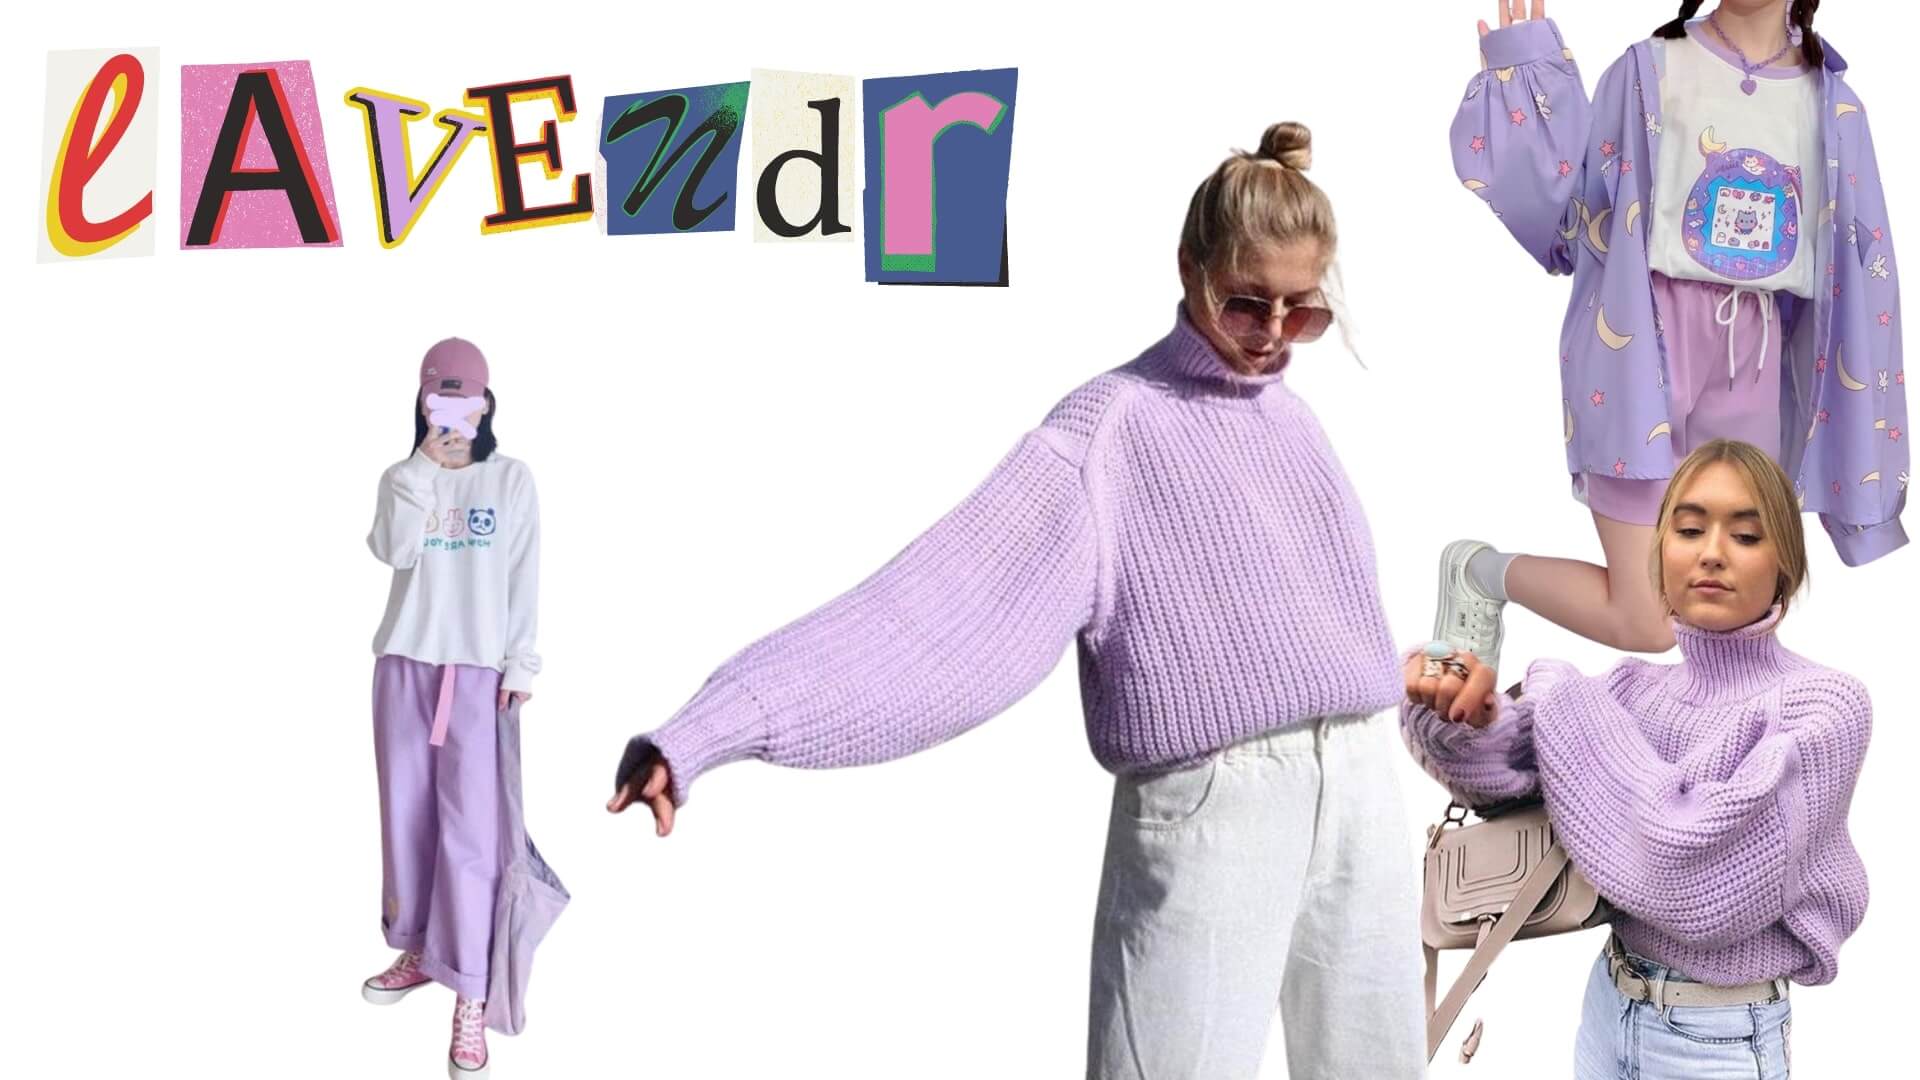 11 FALL 2021 STYLE TRENDS FOR YOU - lavender